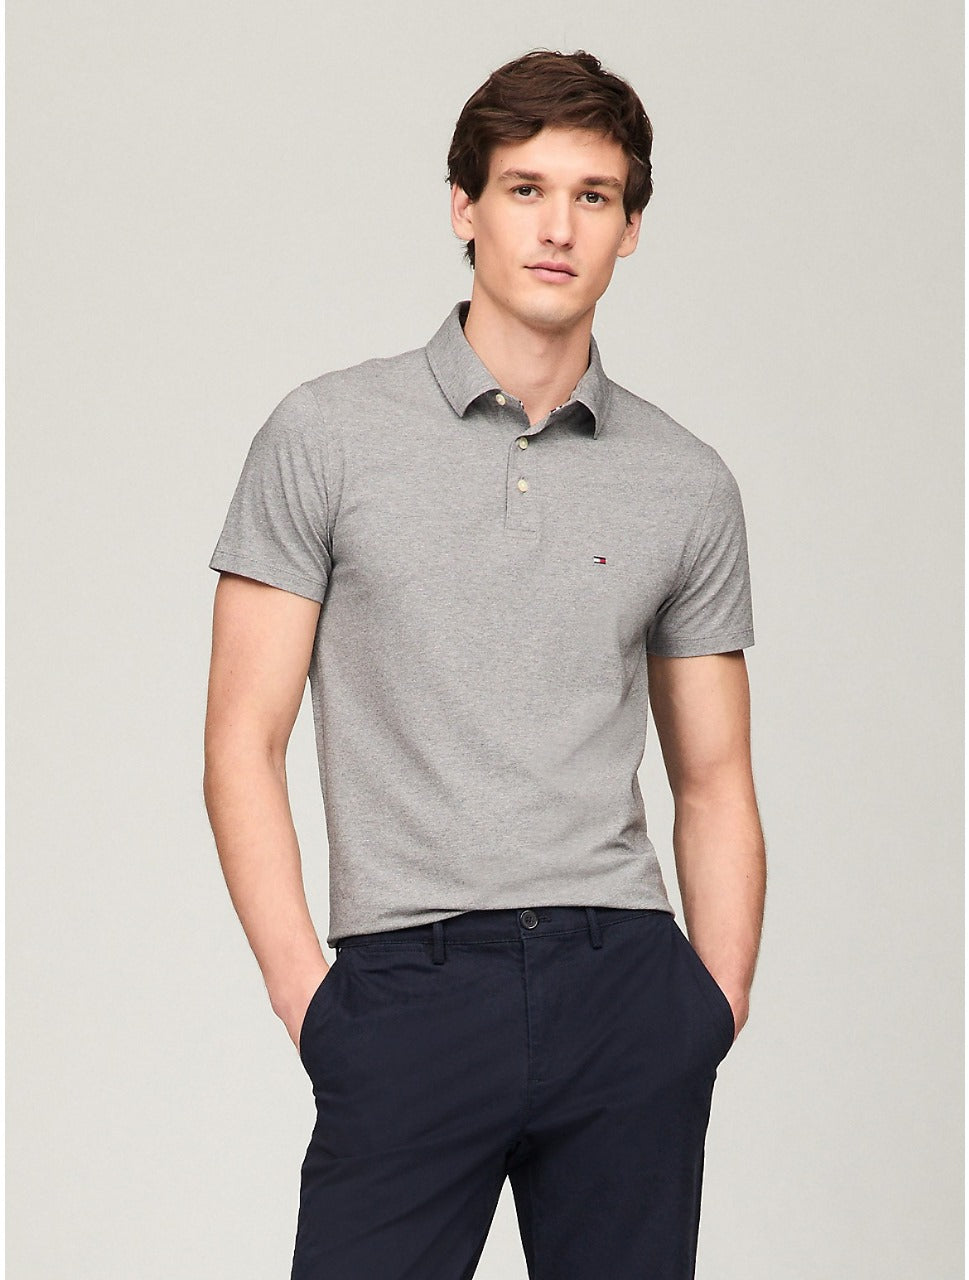 Remera Masculino Tommy Hilfiger Slim Fit Polo Gris